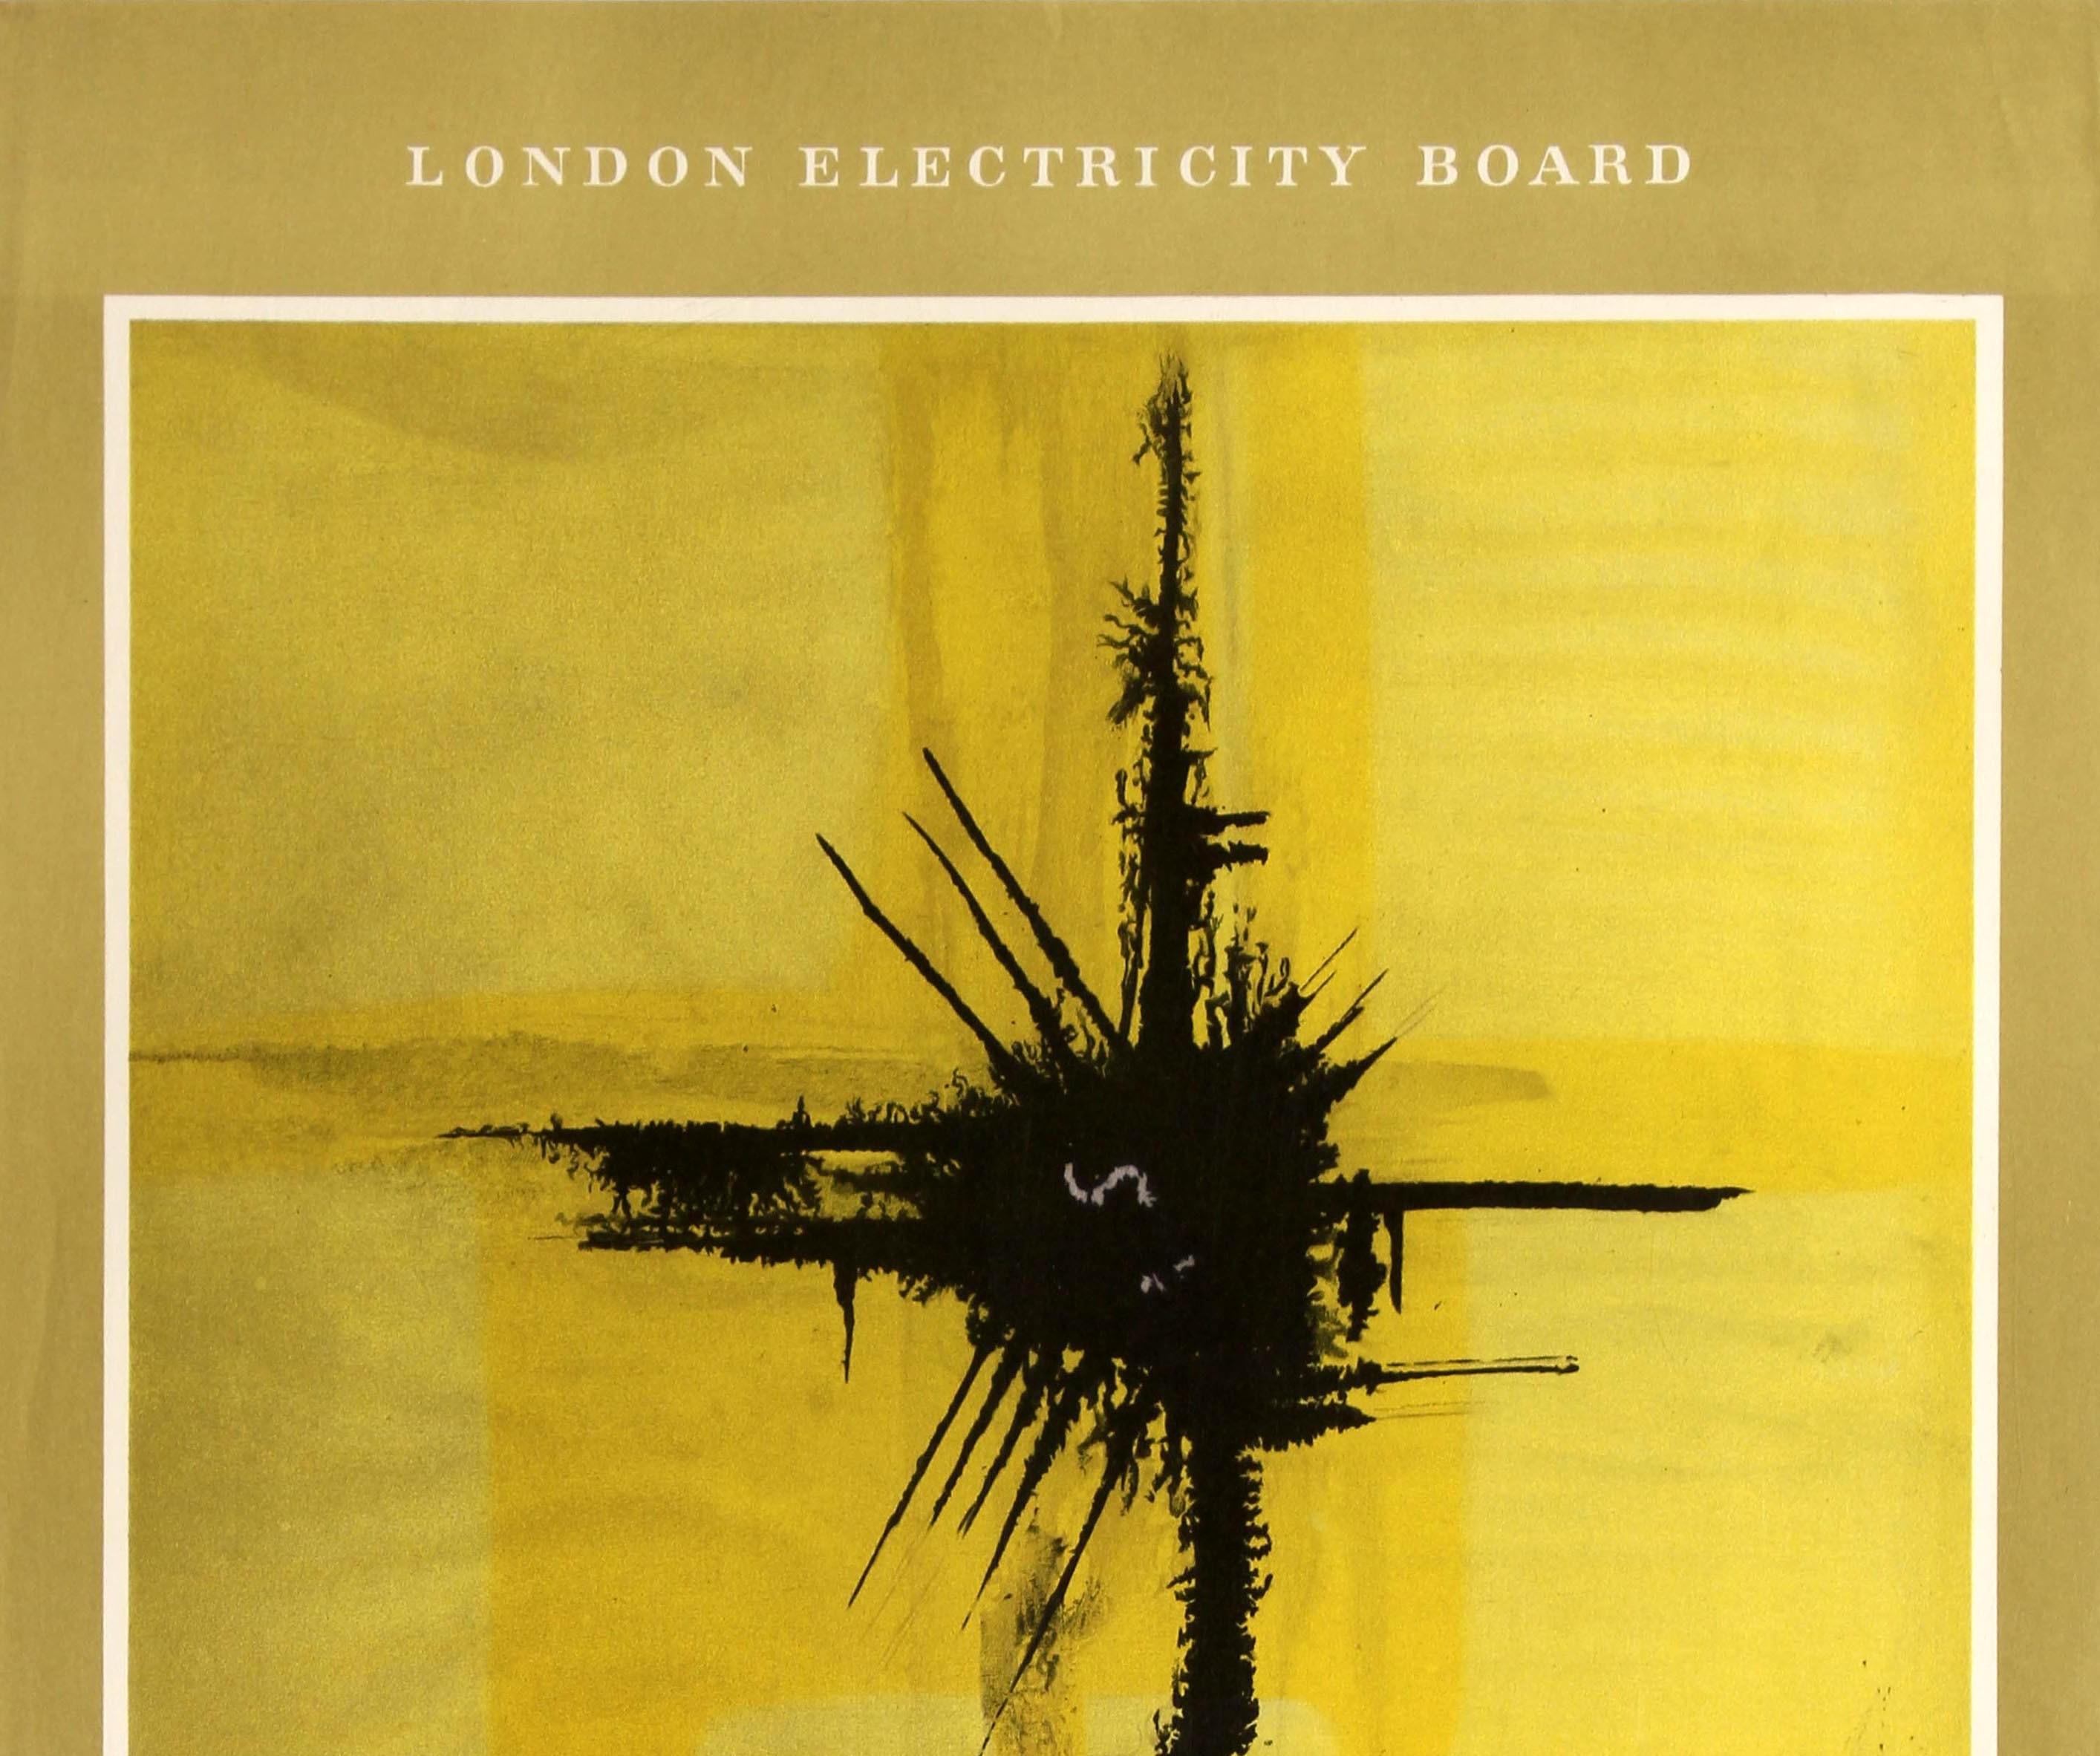 Original vintage London Electricity Board poster entitled The Power of London - Electricity featuring fantastic artwork From the design by Geoffrey Clarke produced for L.E.B. by the Royal College of Art showing an abstract artwork by the artist and